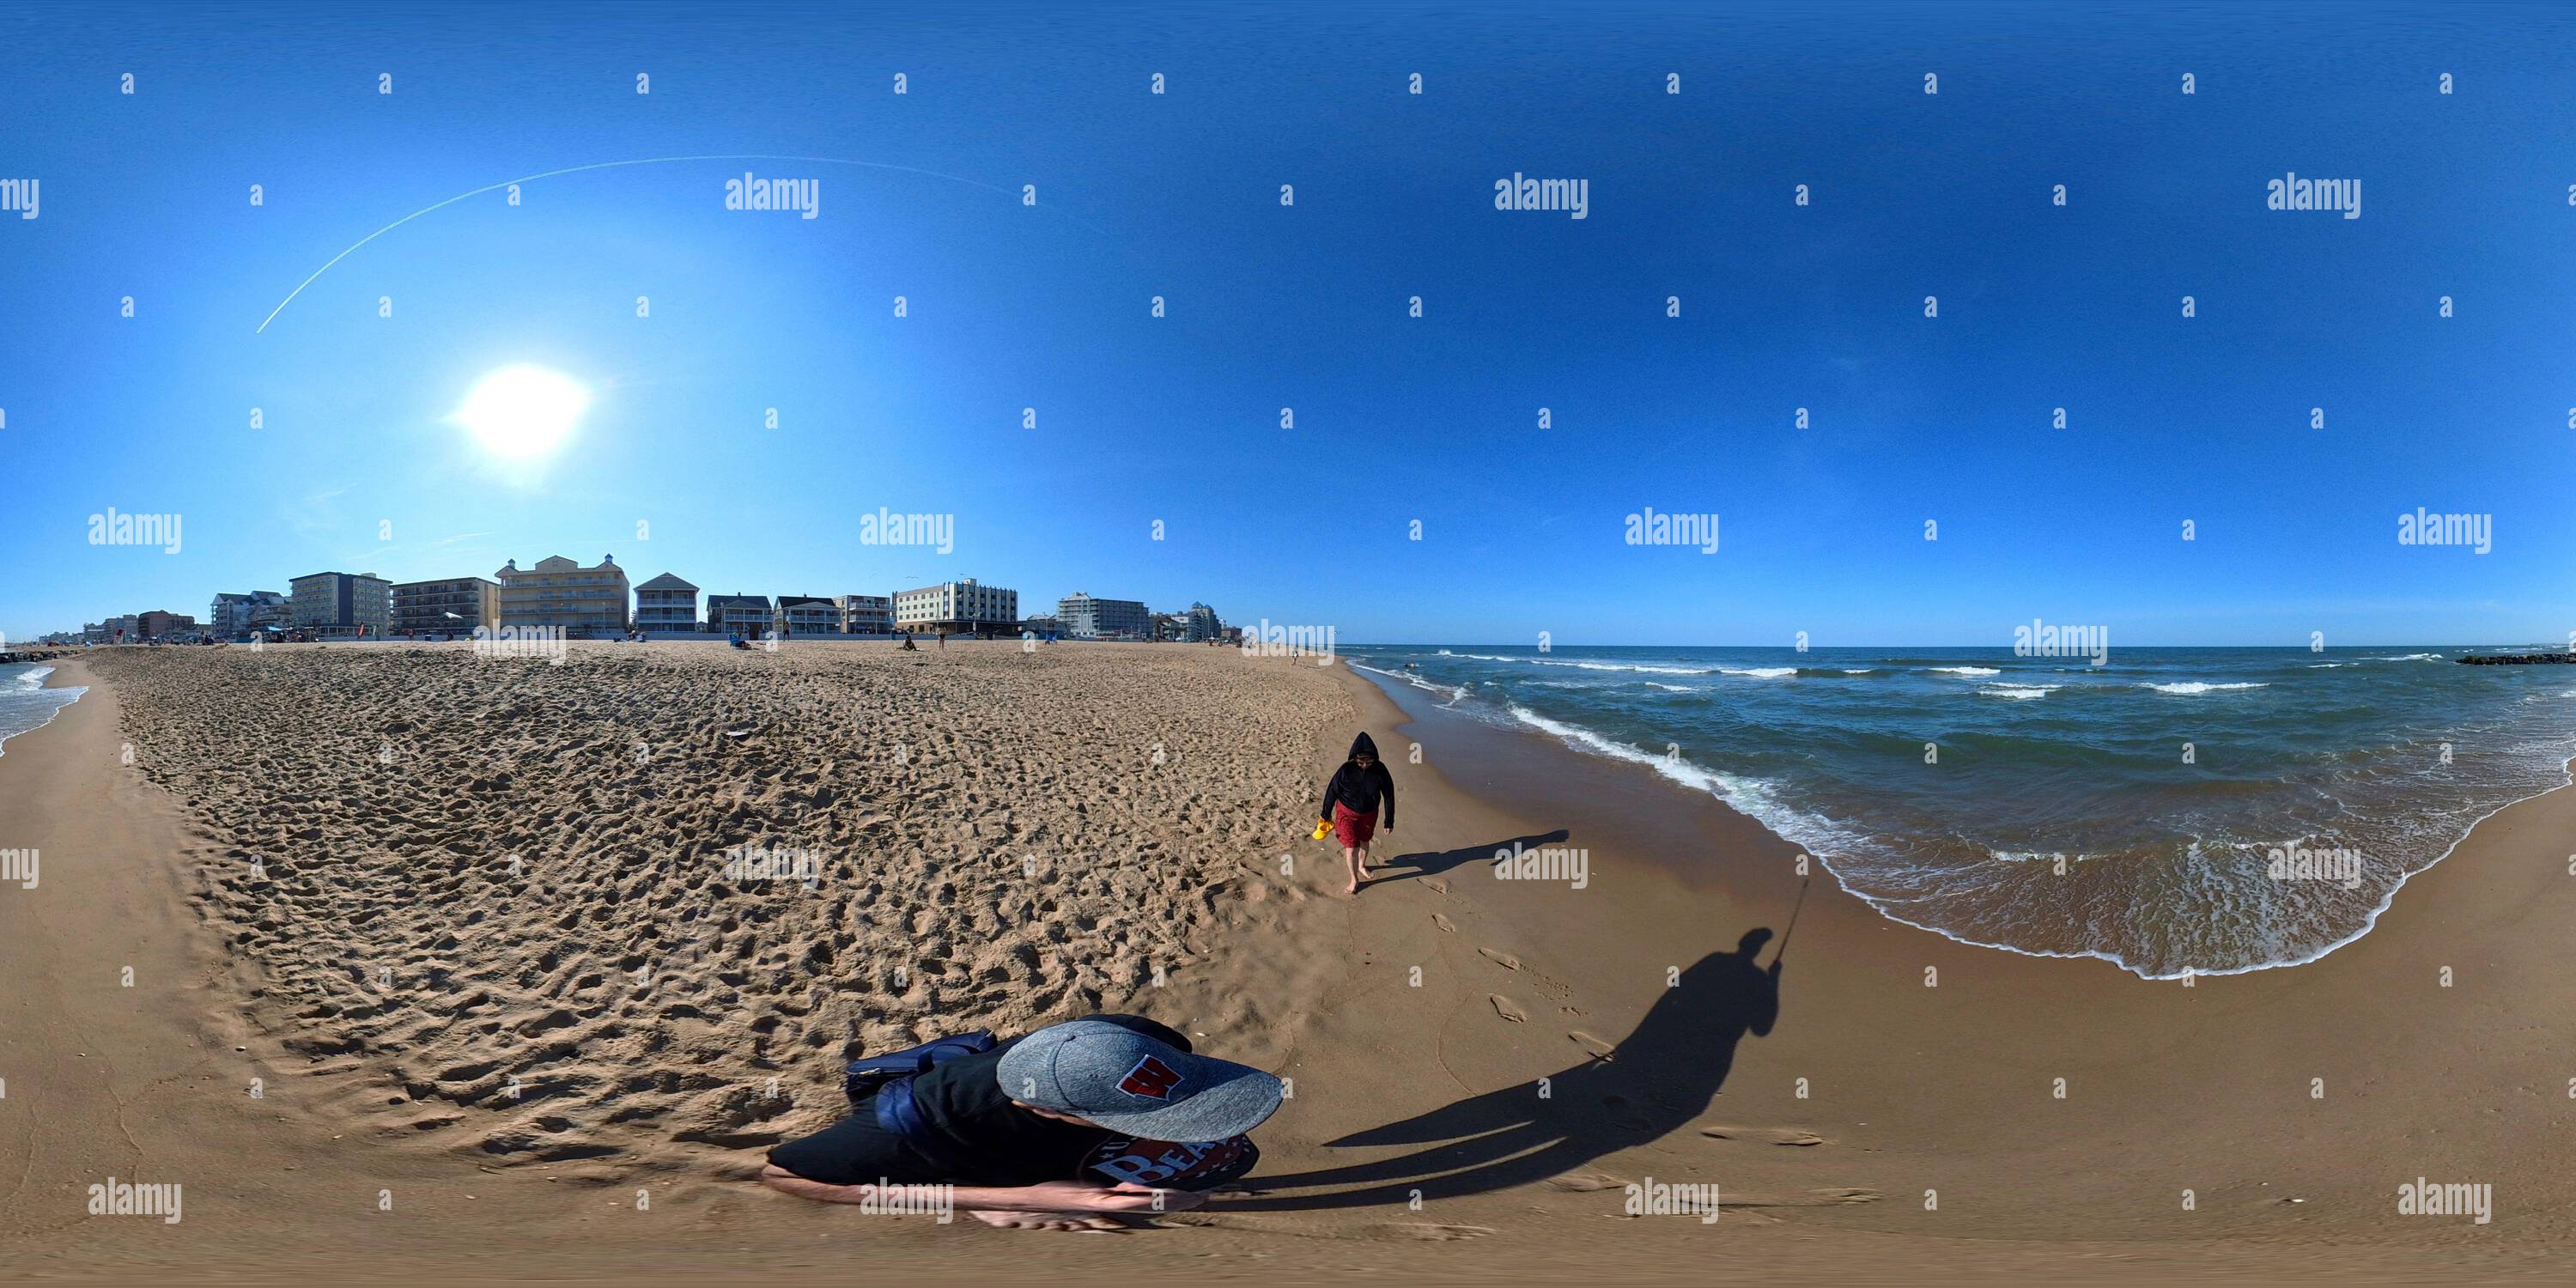 360 degree panoramic view of On the beach in Ocean City, Maryland near 12th Street